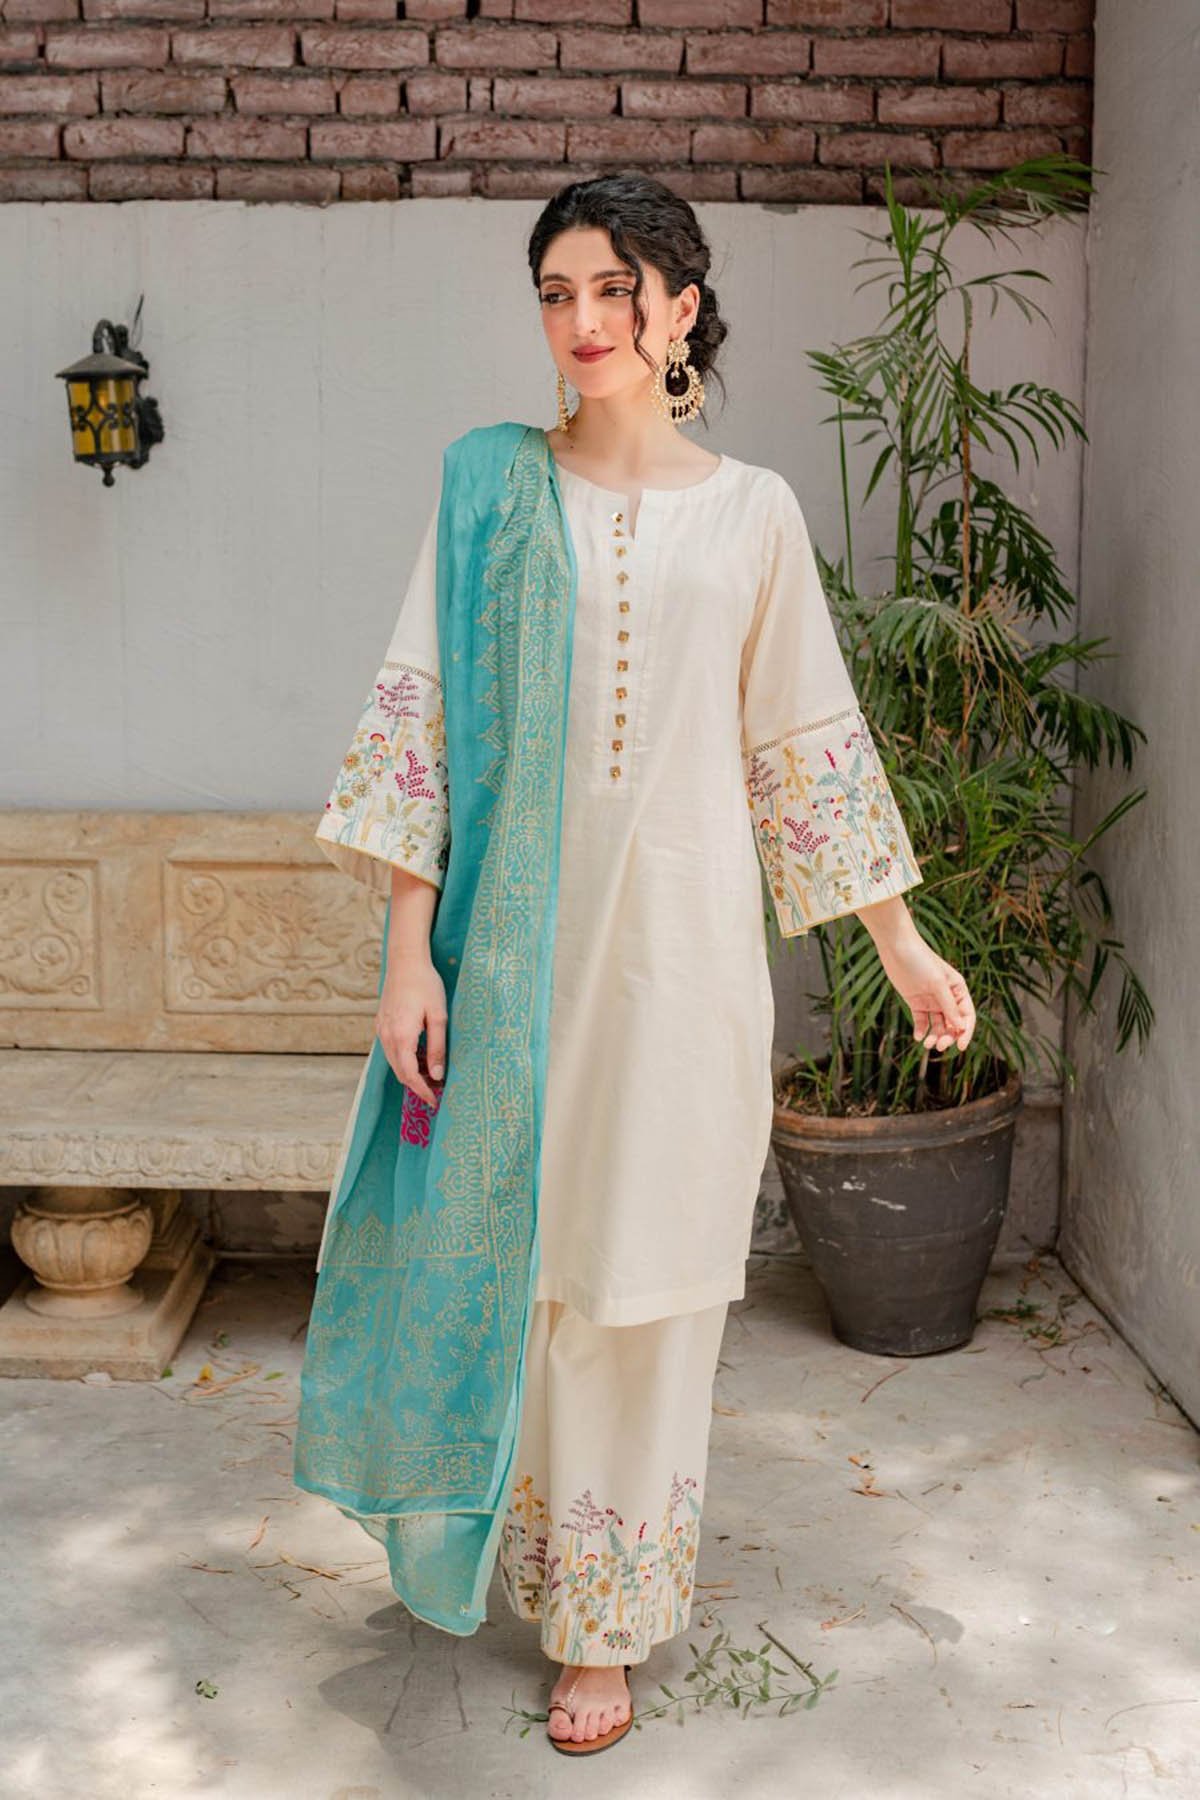 Lime Light women new dress design empires collection pakistan top brand clothing brand fashion 3 piece suit